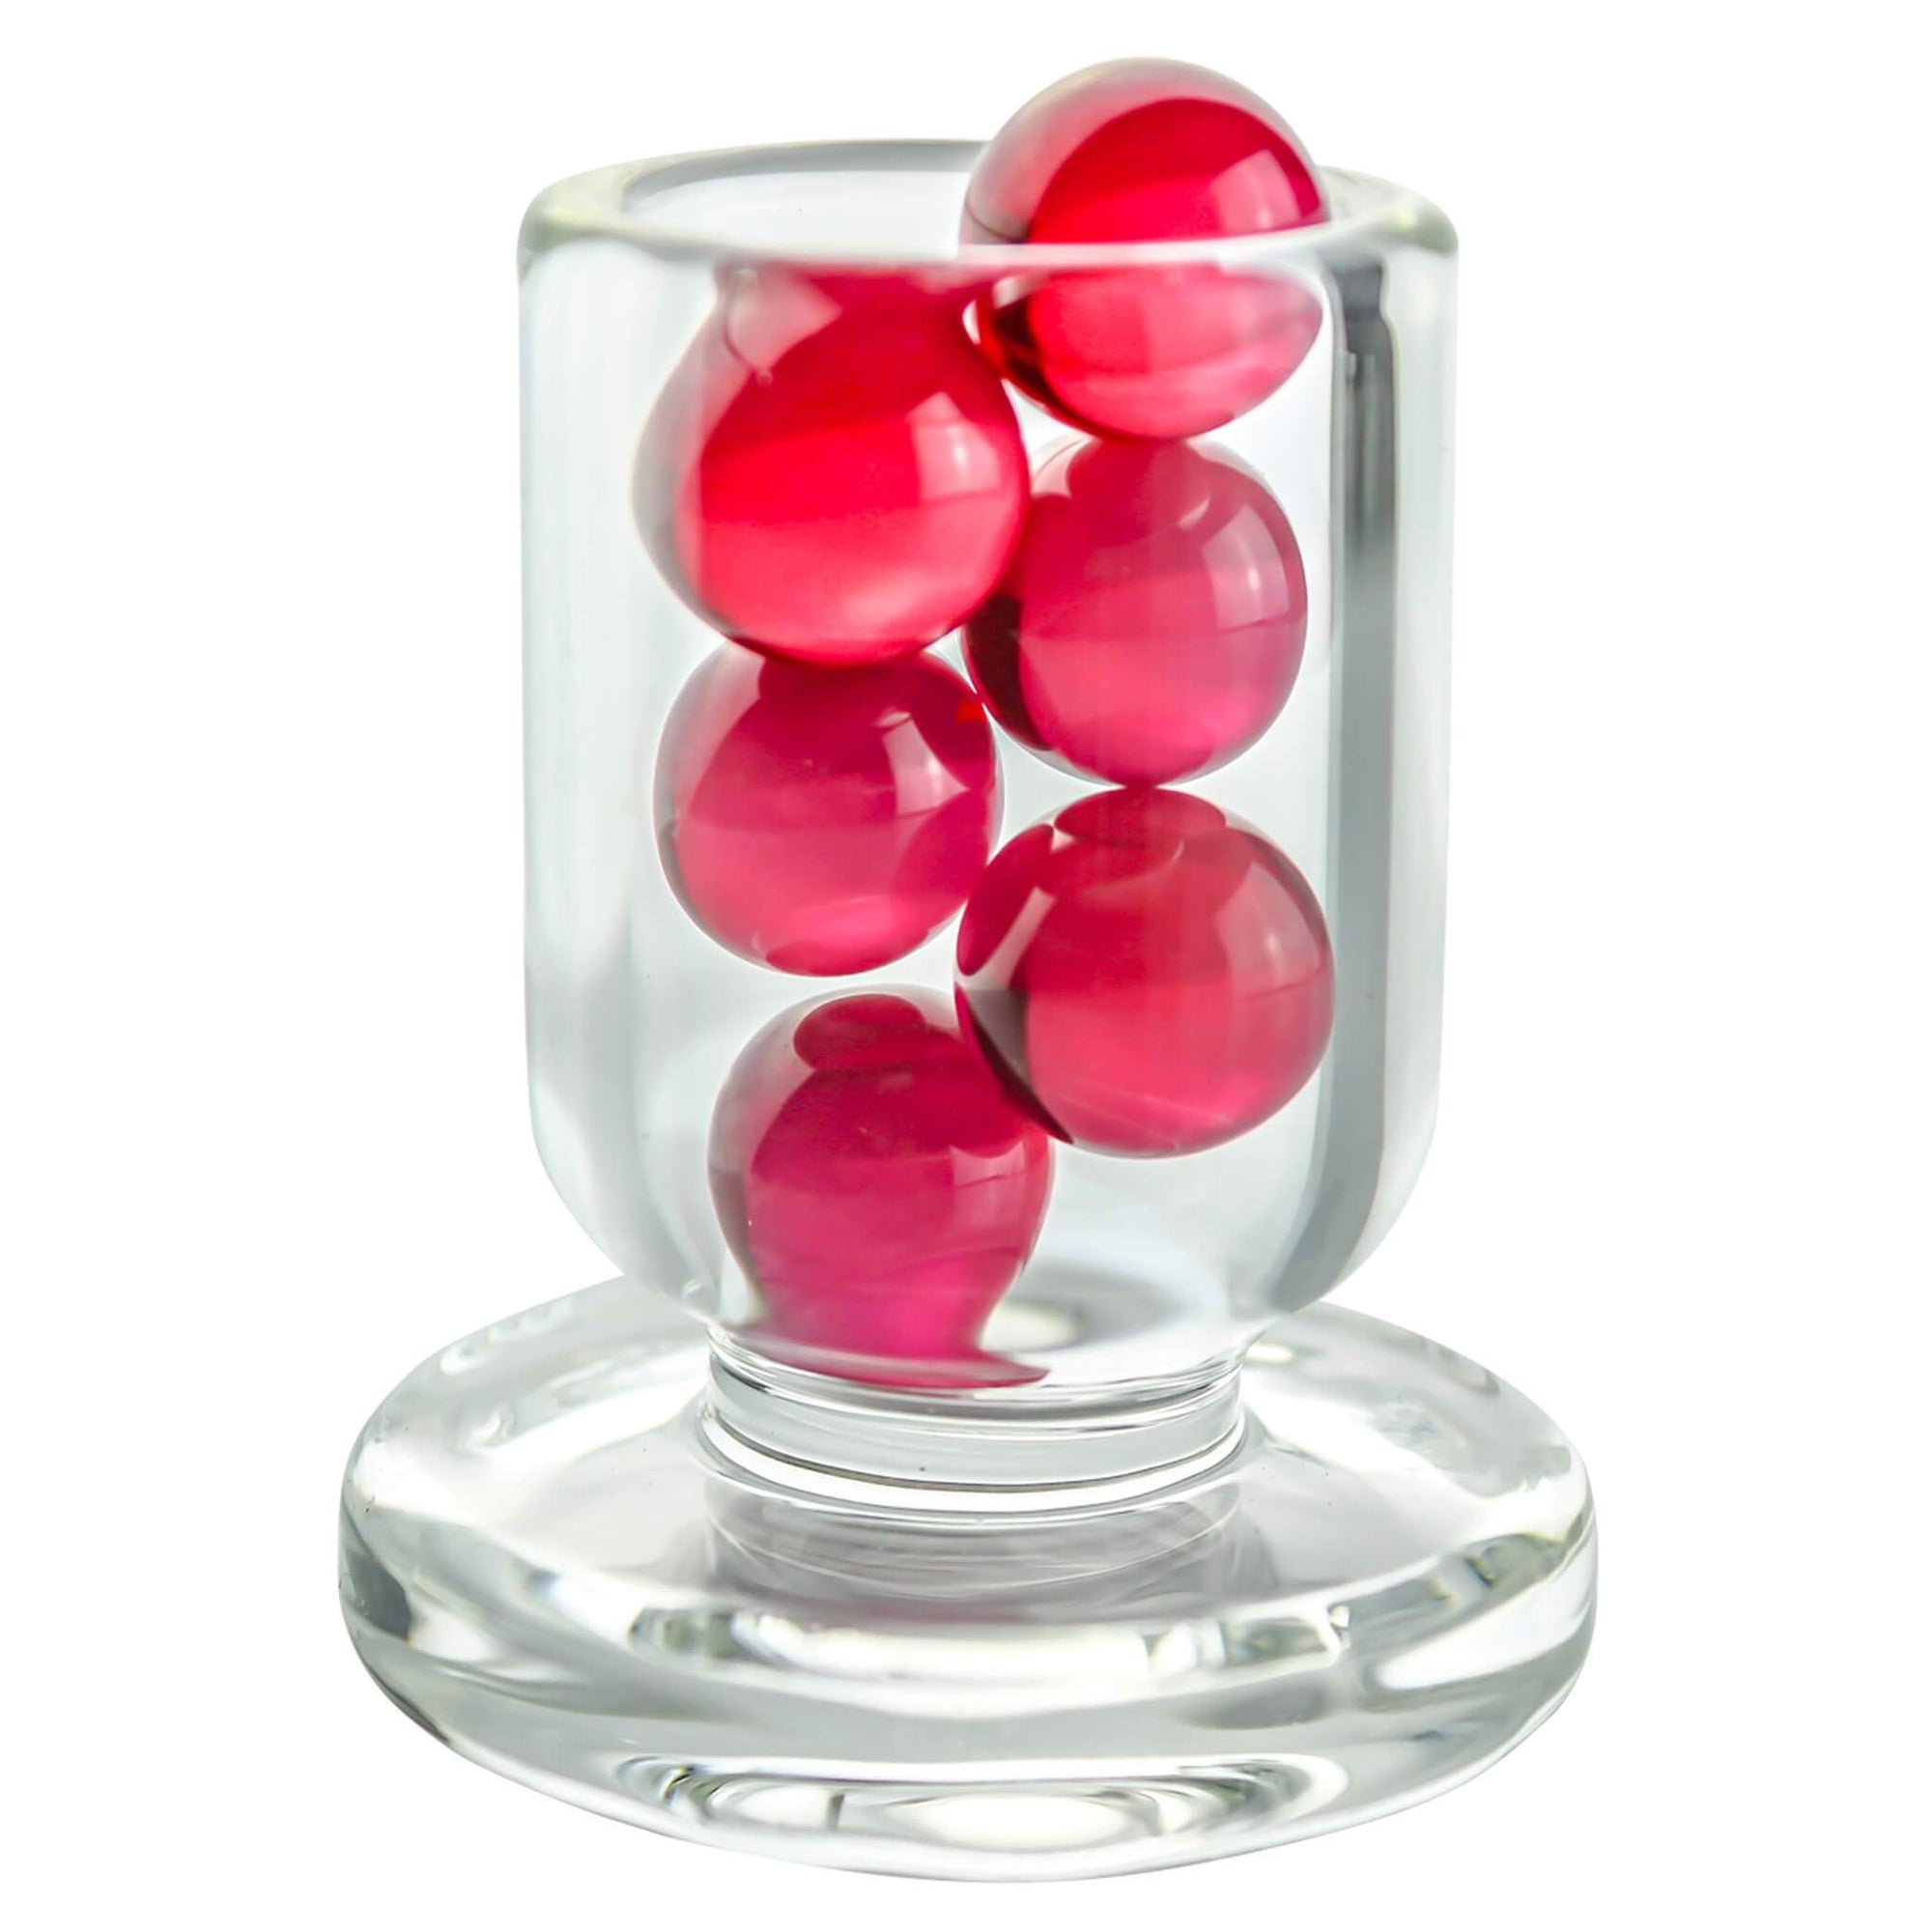 10mm Terp (Dab) Pearls-Ruby | In 25mm Banger | Dabbing Warehouse